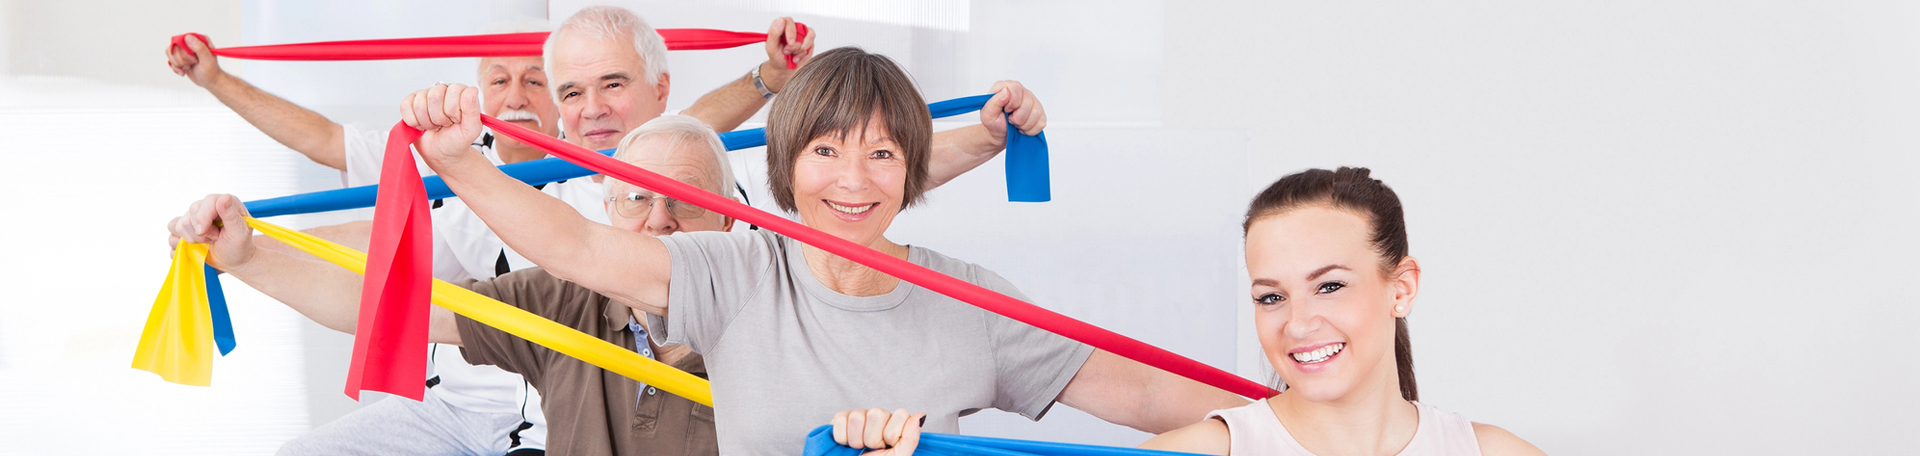 Georgetown chiropractic care and exercise of all types help reduce chronic pain and distress